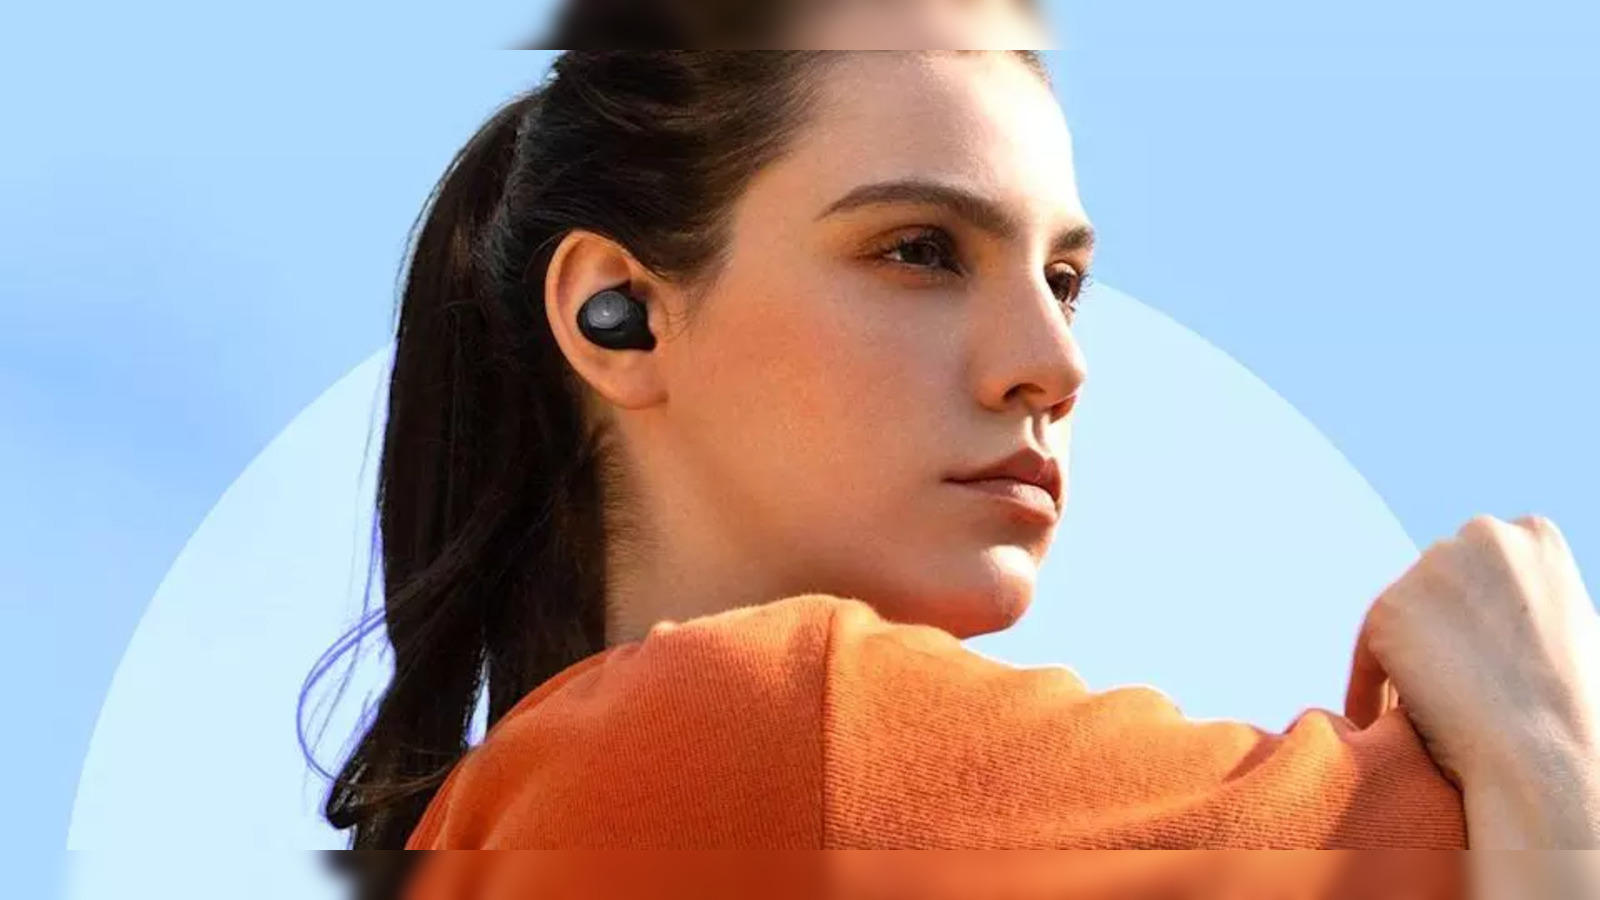 Jbl: JBL Live Pro 2 true wireless earbuds launched in India: Price,  features and more - Times of India